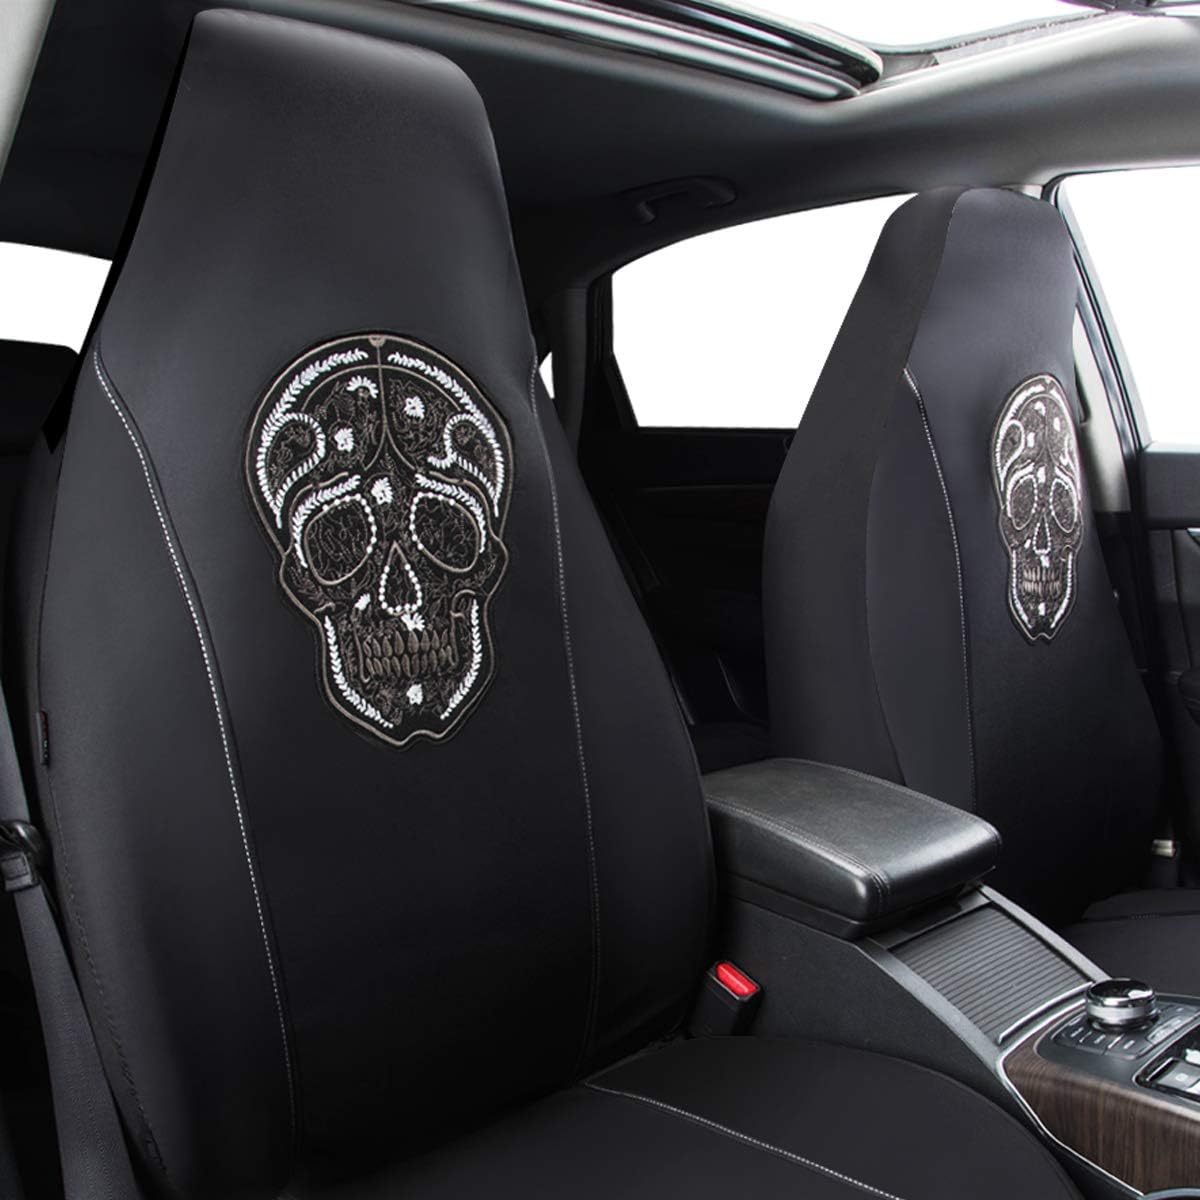 CAR PASS Skull Design Universal Fit Two Front Seat Covers, Gaberdine Fabric Cloth Front Seats Only Skeleton Punkl, Universal Fit for SUVs,Vans,Coupe,Trucks (2 Piece Black White)